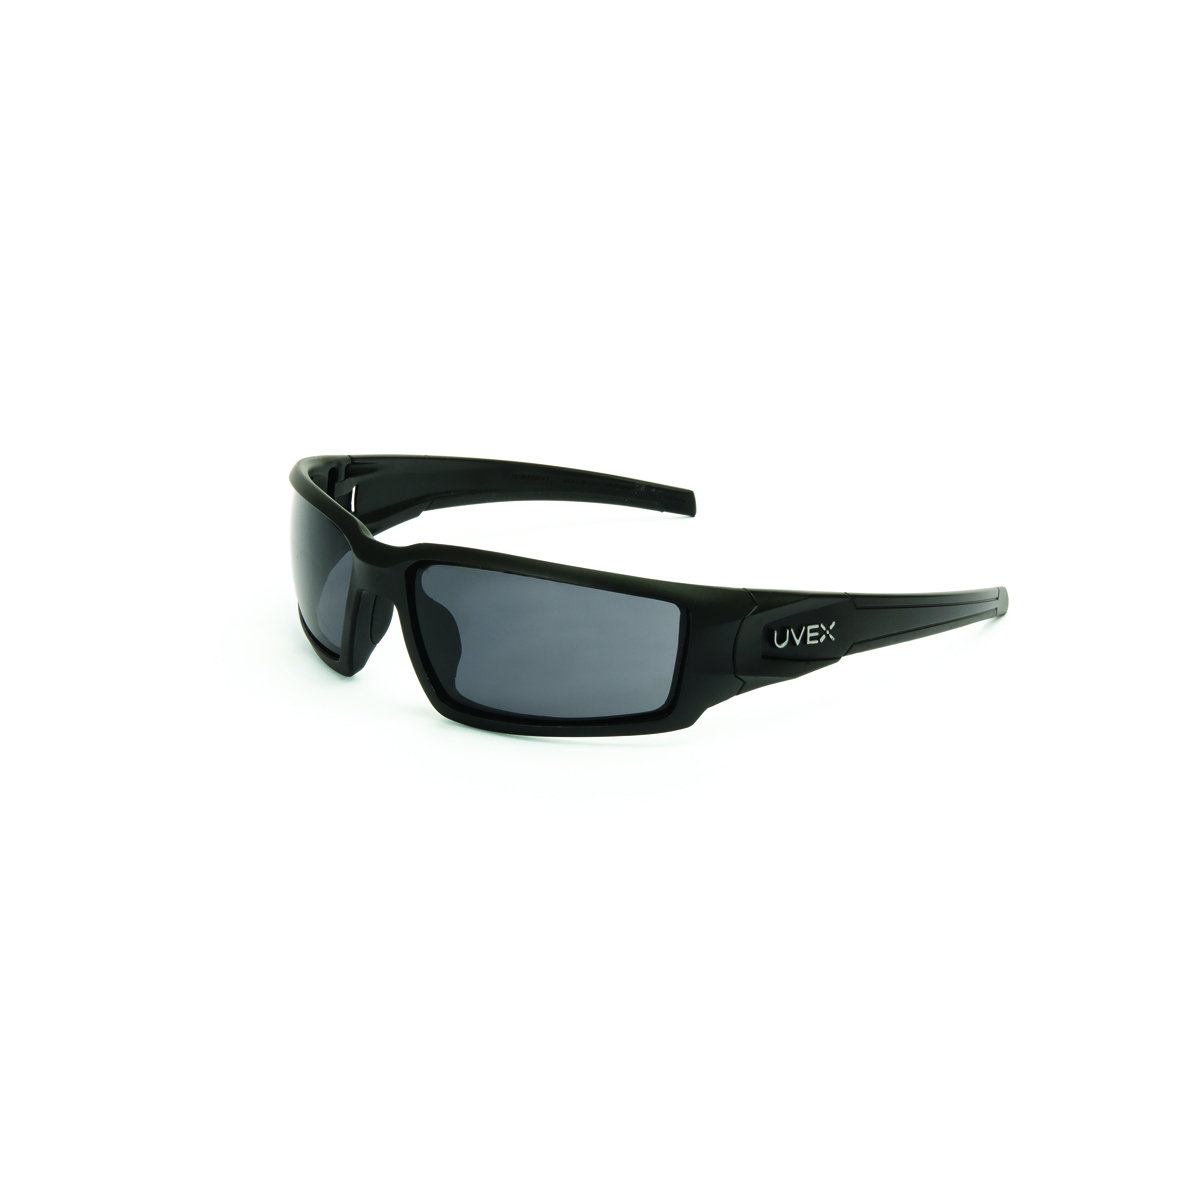 Honeywell Uvex Hypershock® Black Safety Glasses With Gray Anti-Fog Lens (Availability restrictions apply.)